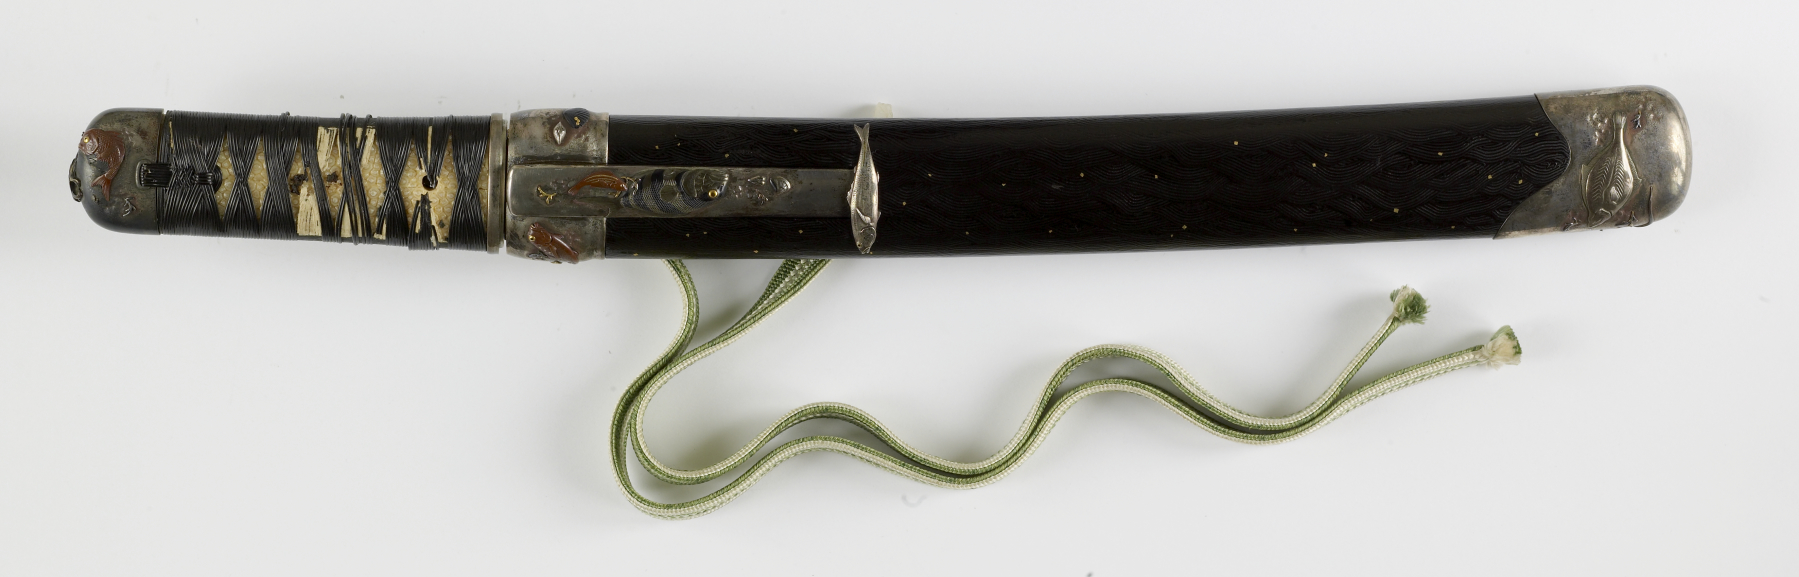 Image for Dagger (aikuchi) with dark brown saya with waves silver mountings, various fish (includes 51.1242.1-51.1242.2)